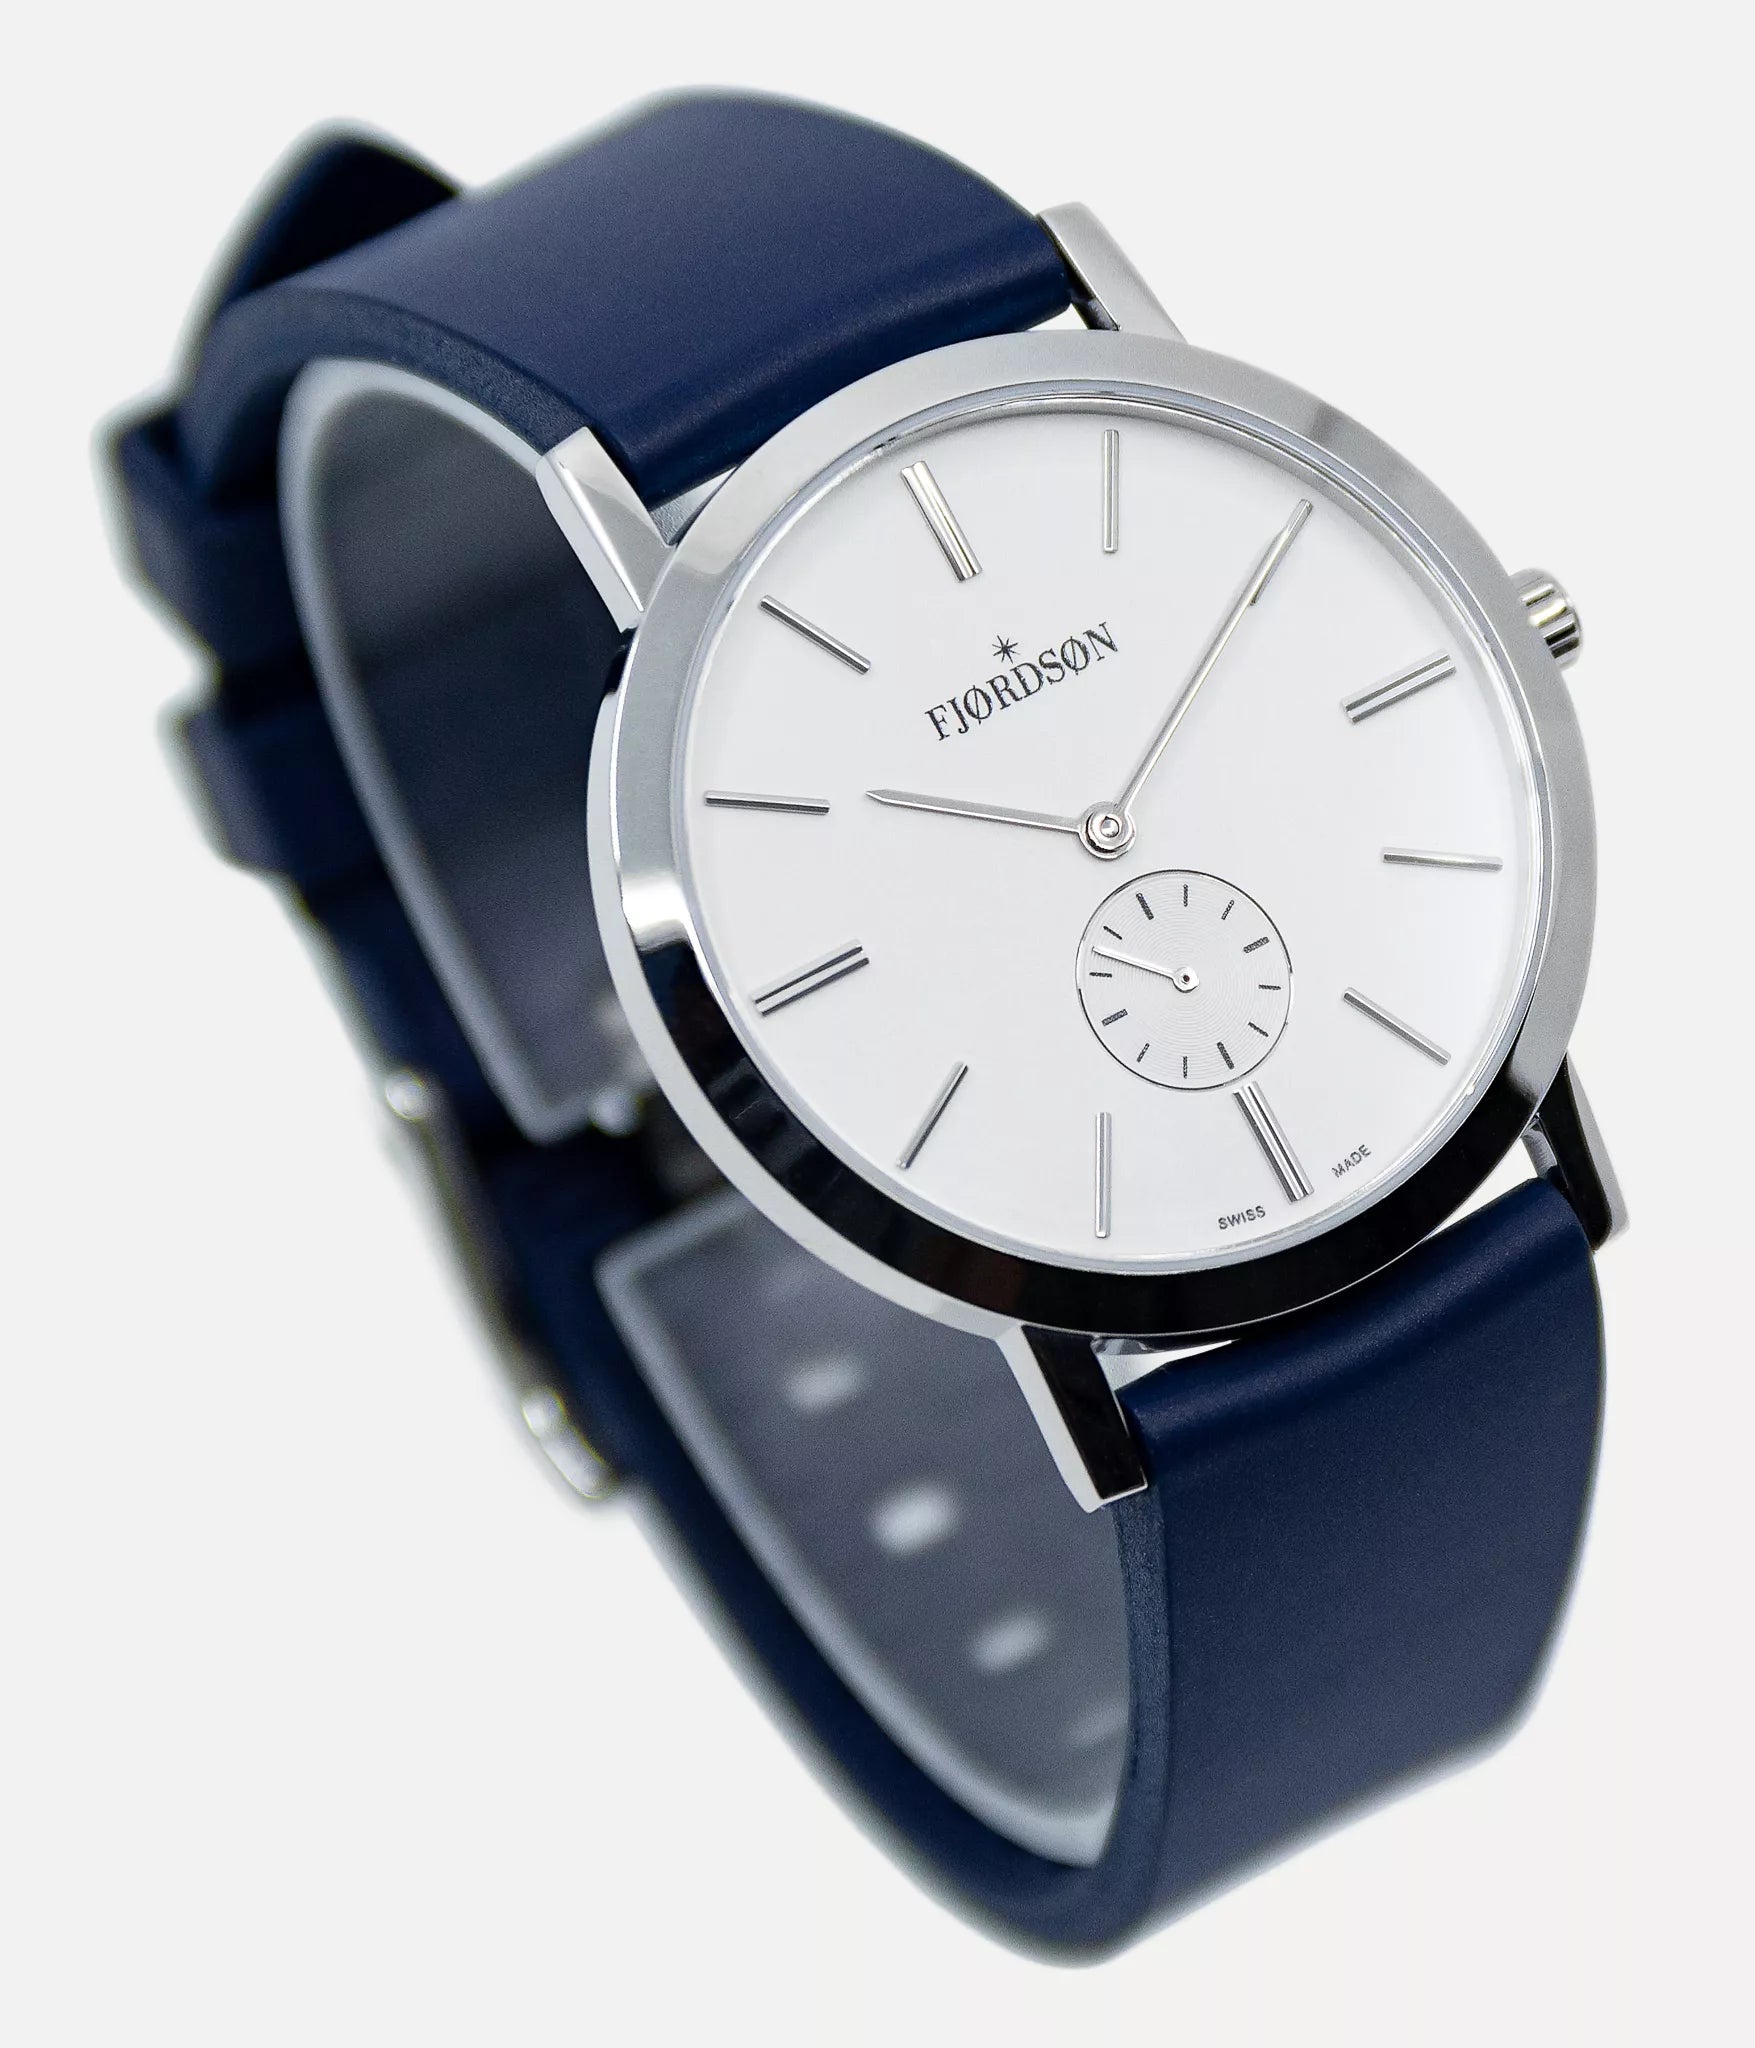 Side shot - Fjordson watch with white dial and blue rubber watch strap - UNISEX - vegan & approved by PETA - Swiss made